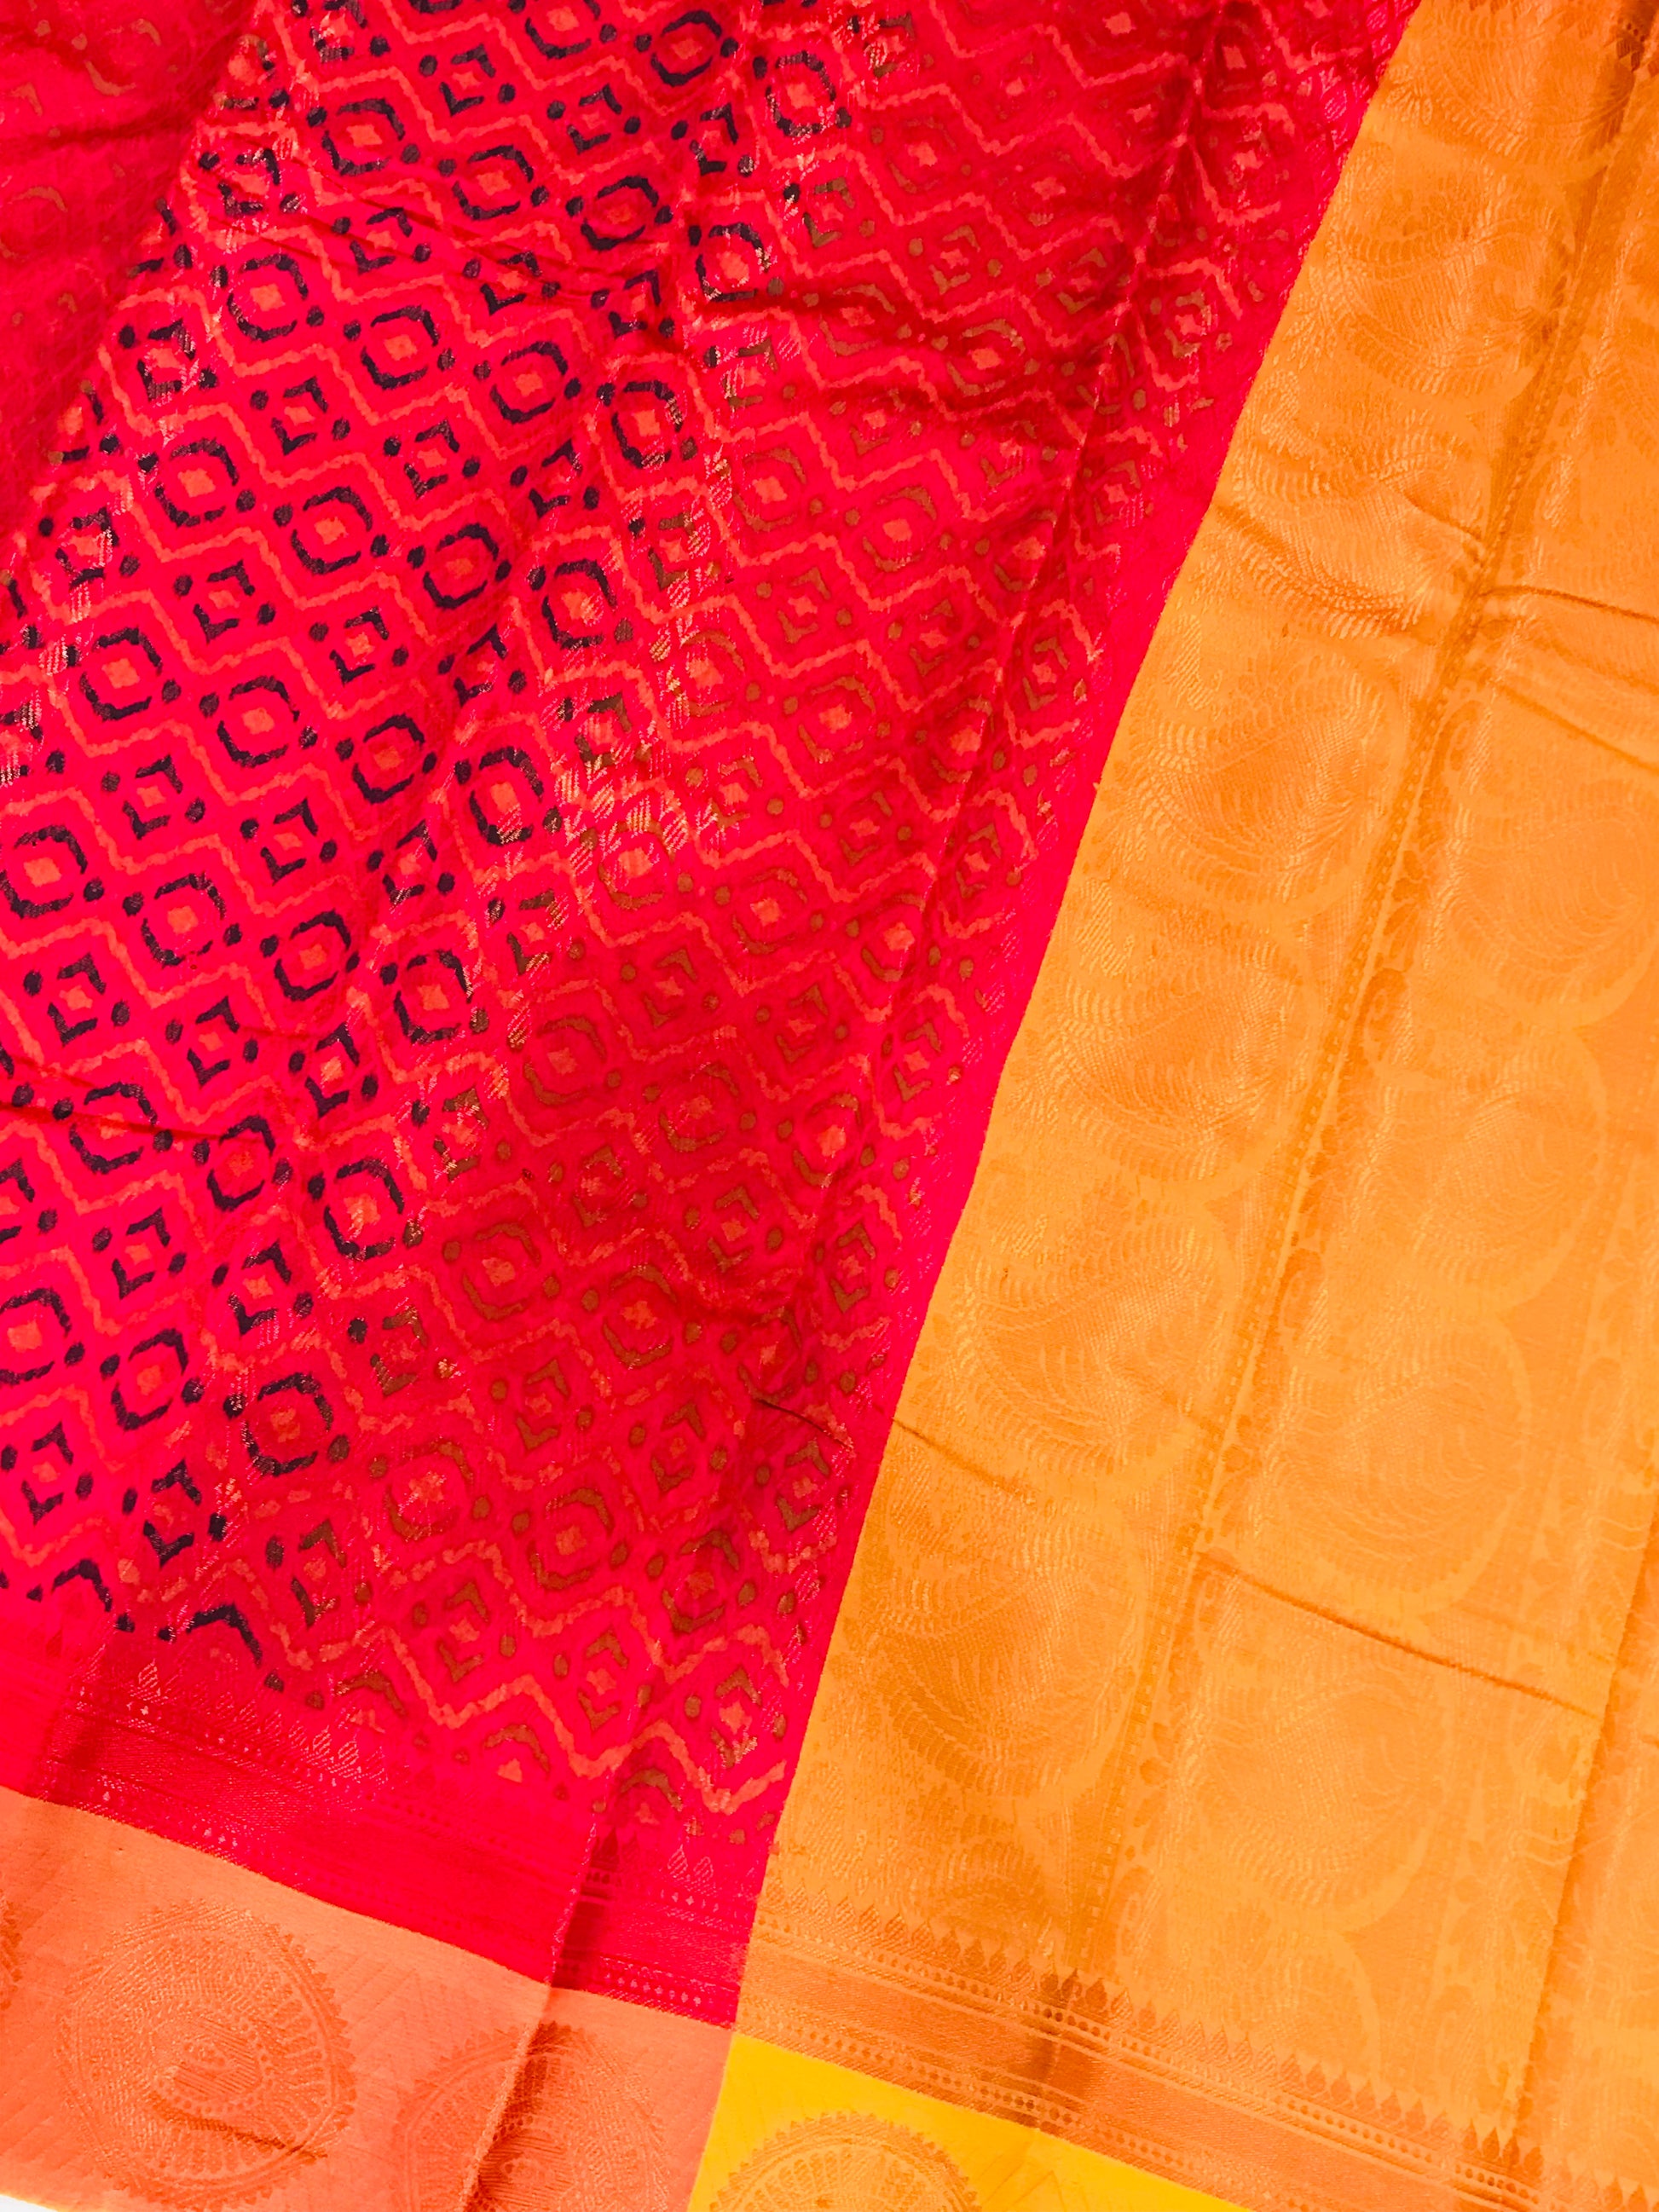 Cotton Saree With Brocades And Contrast Border in USA